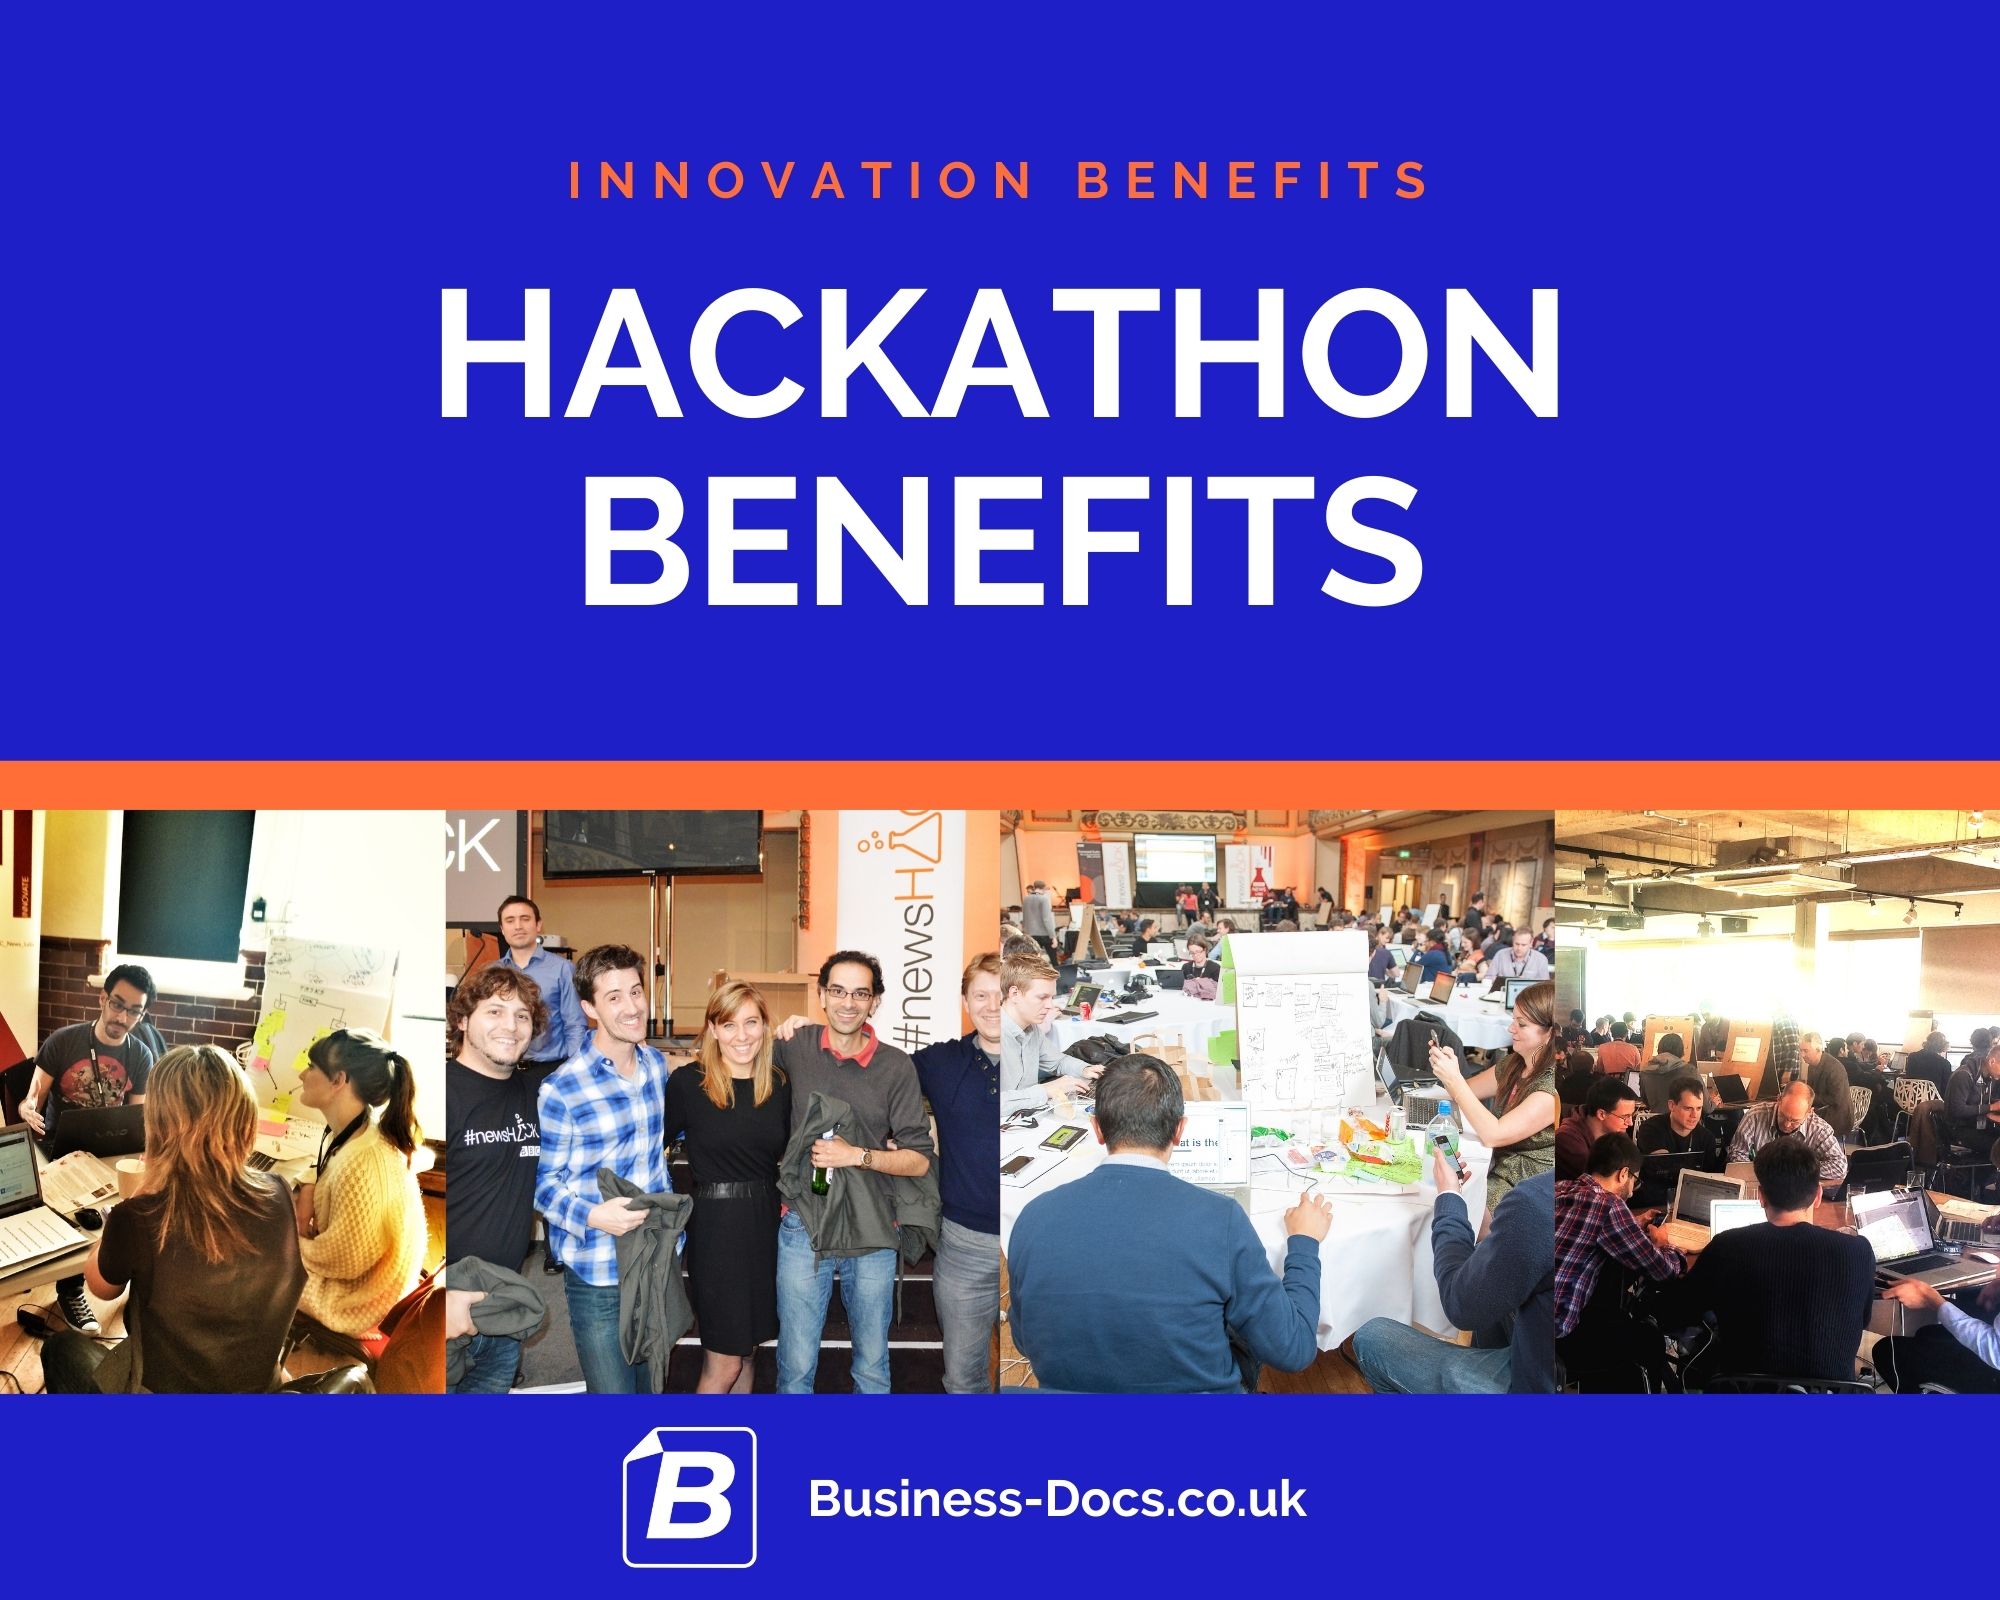 The Benefits of running a Hackathon or Hack Day Event